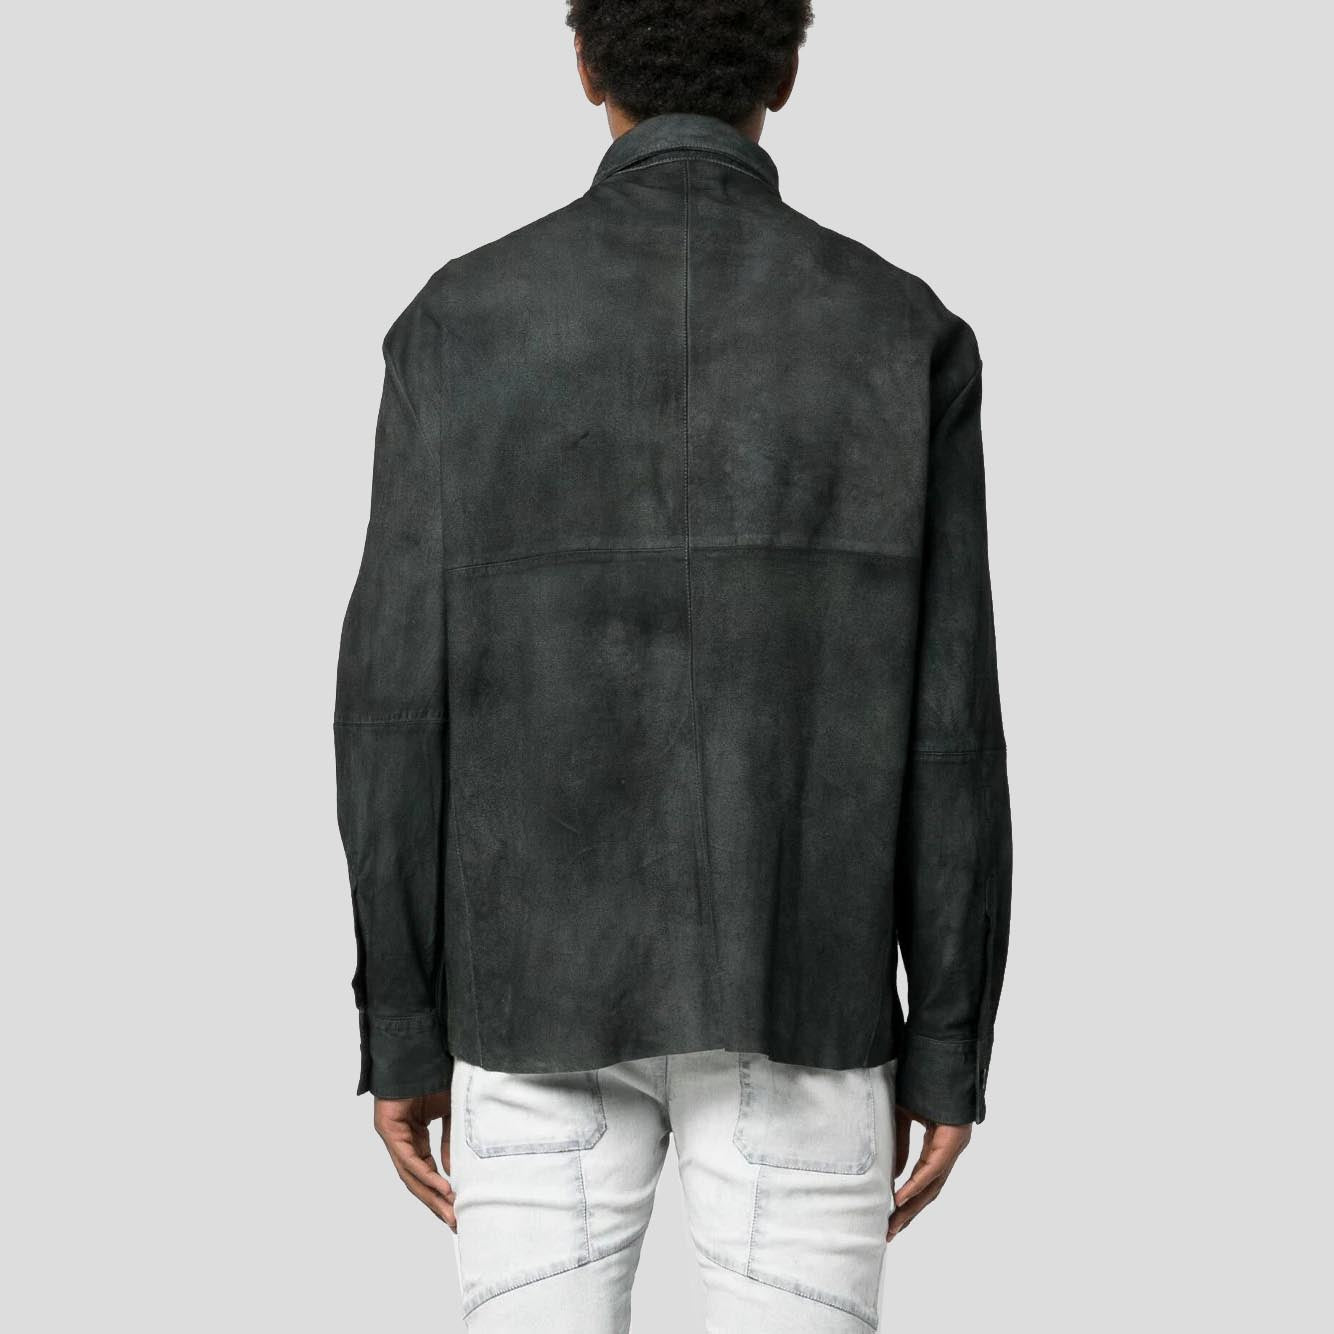 Men's Distressed Black Suede Leather Shirt